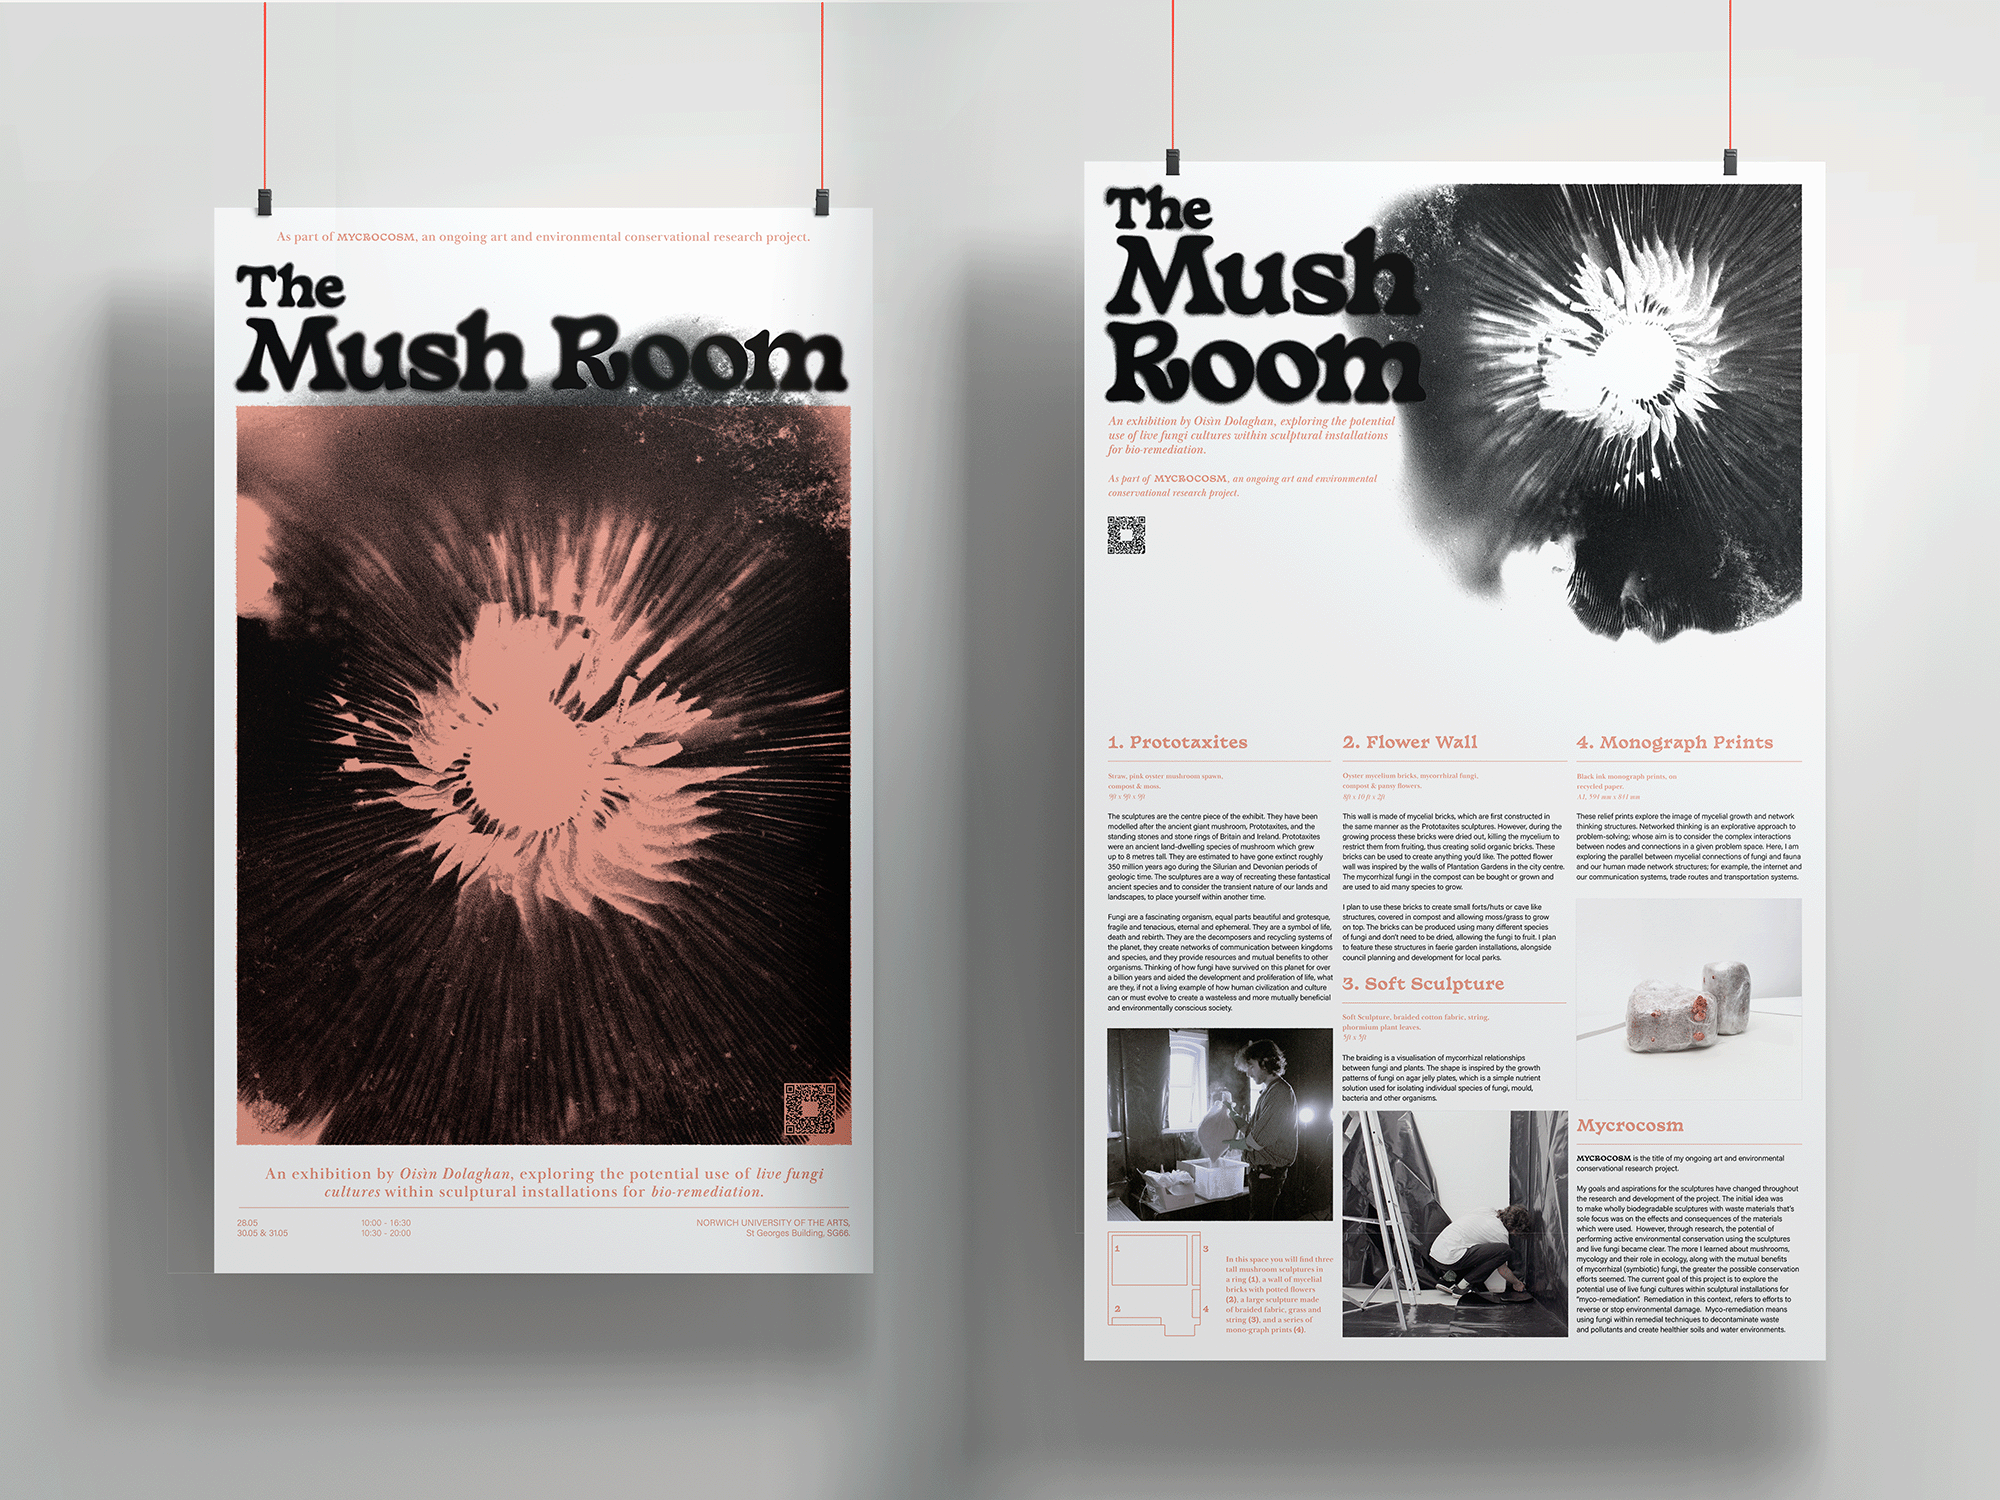 BA Design for Publishing work by Michaela-Jay Appleton, showing a poster and broadsheet design for a fine art exhibition, exploring the use of mushrooms for environmental conservation.